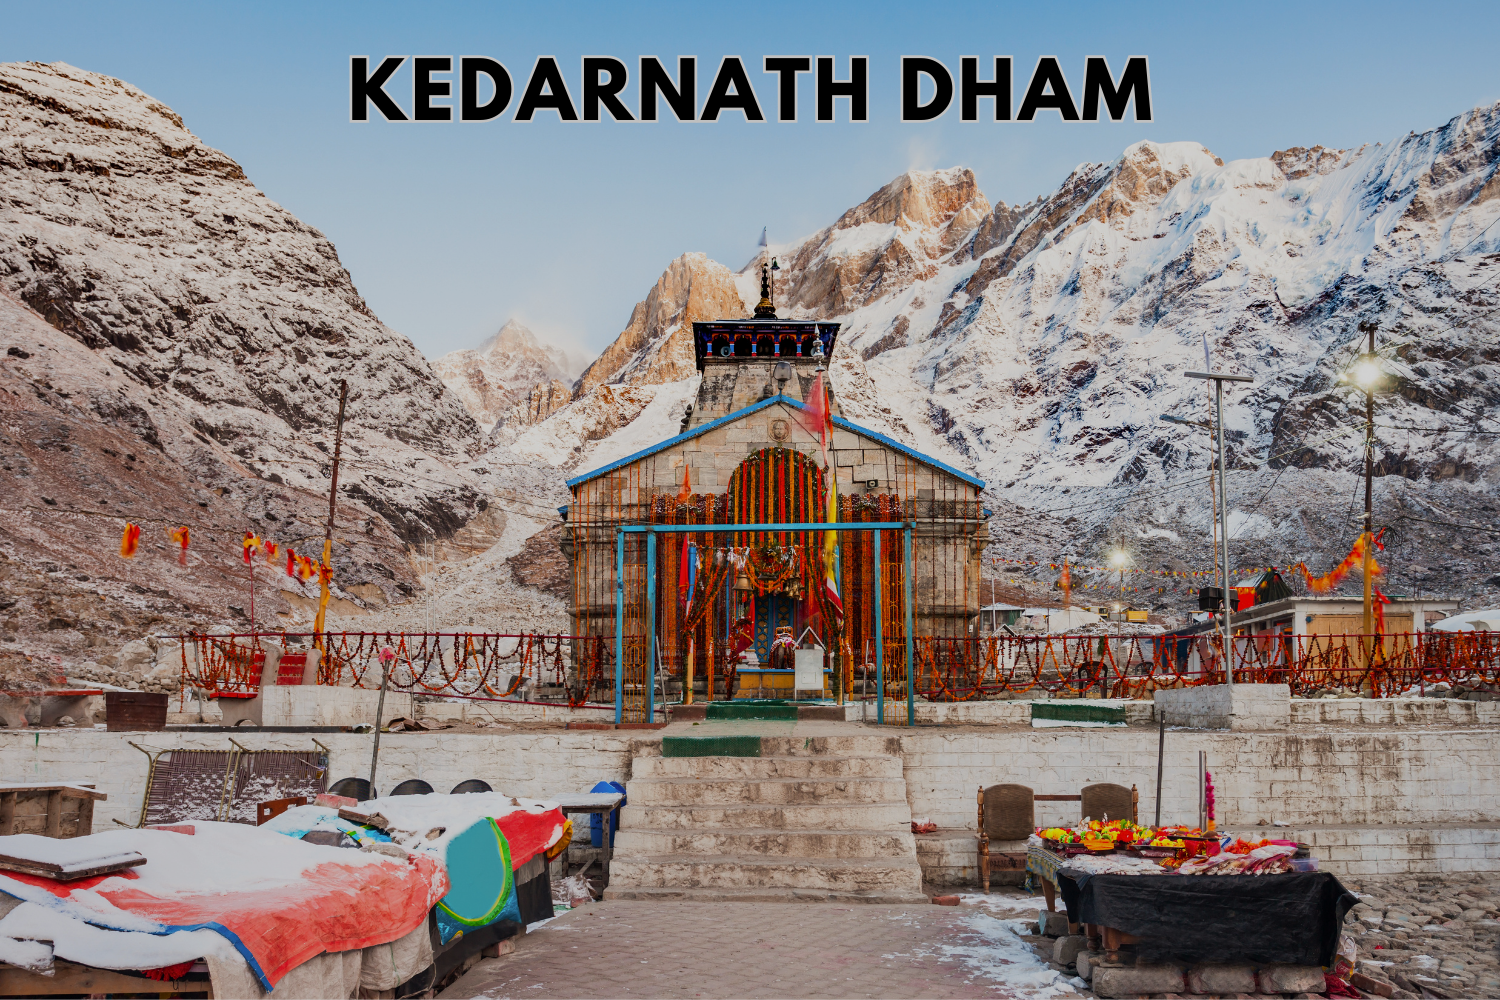 What all places you can visit at Kedarnath Dham?